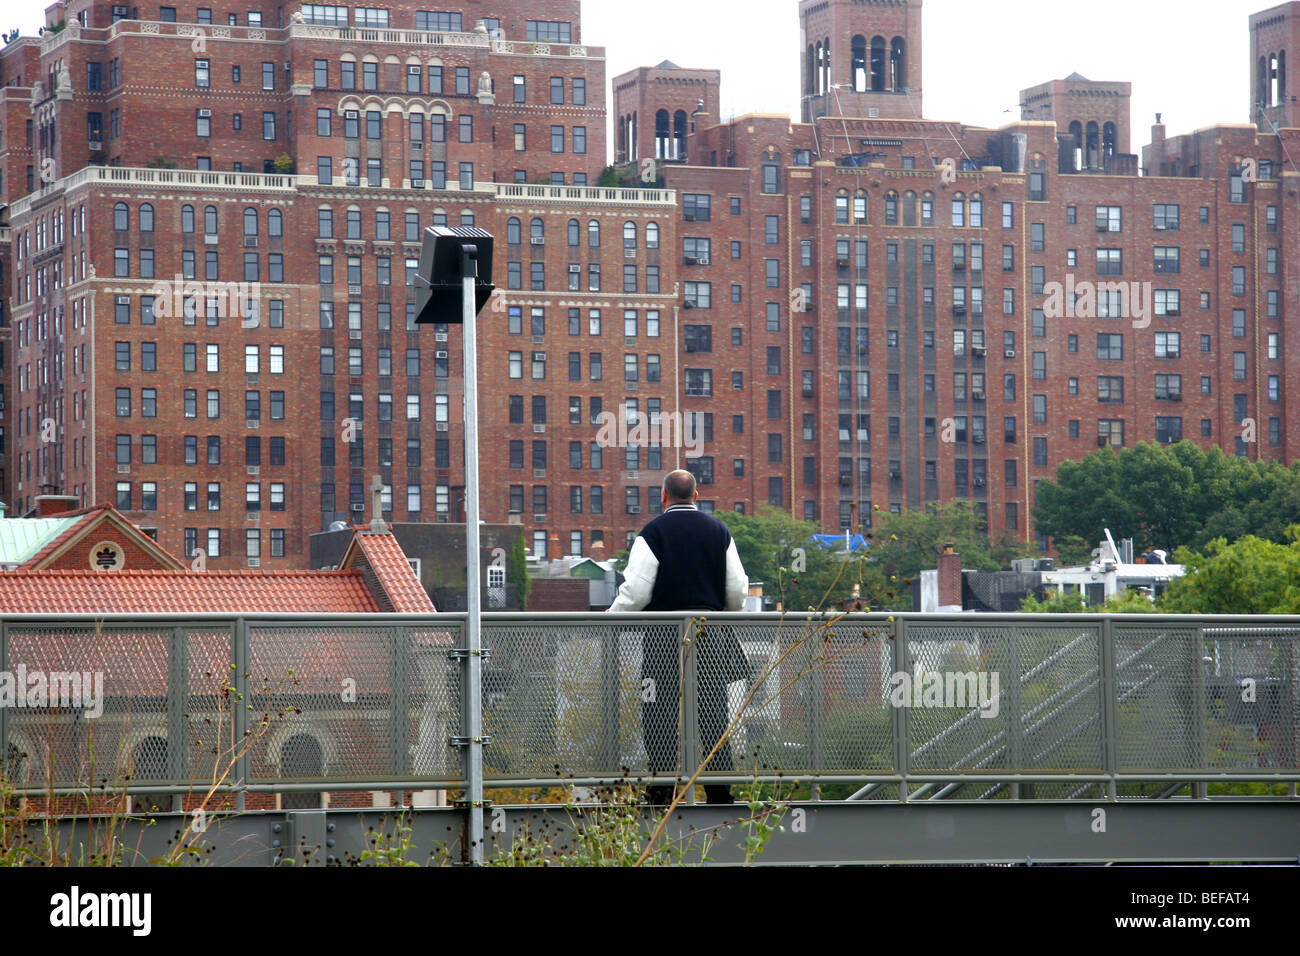 Man looking at buildings in Manhattan on the High Line Walkway above the Meatpacking District, New York City, USA Stock Photo